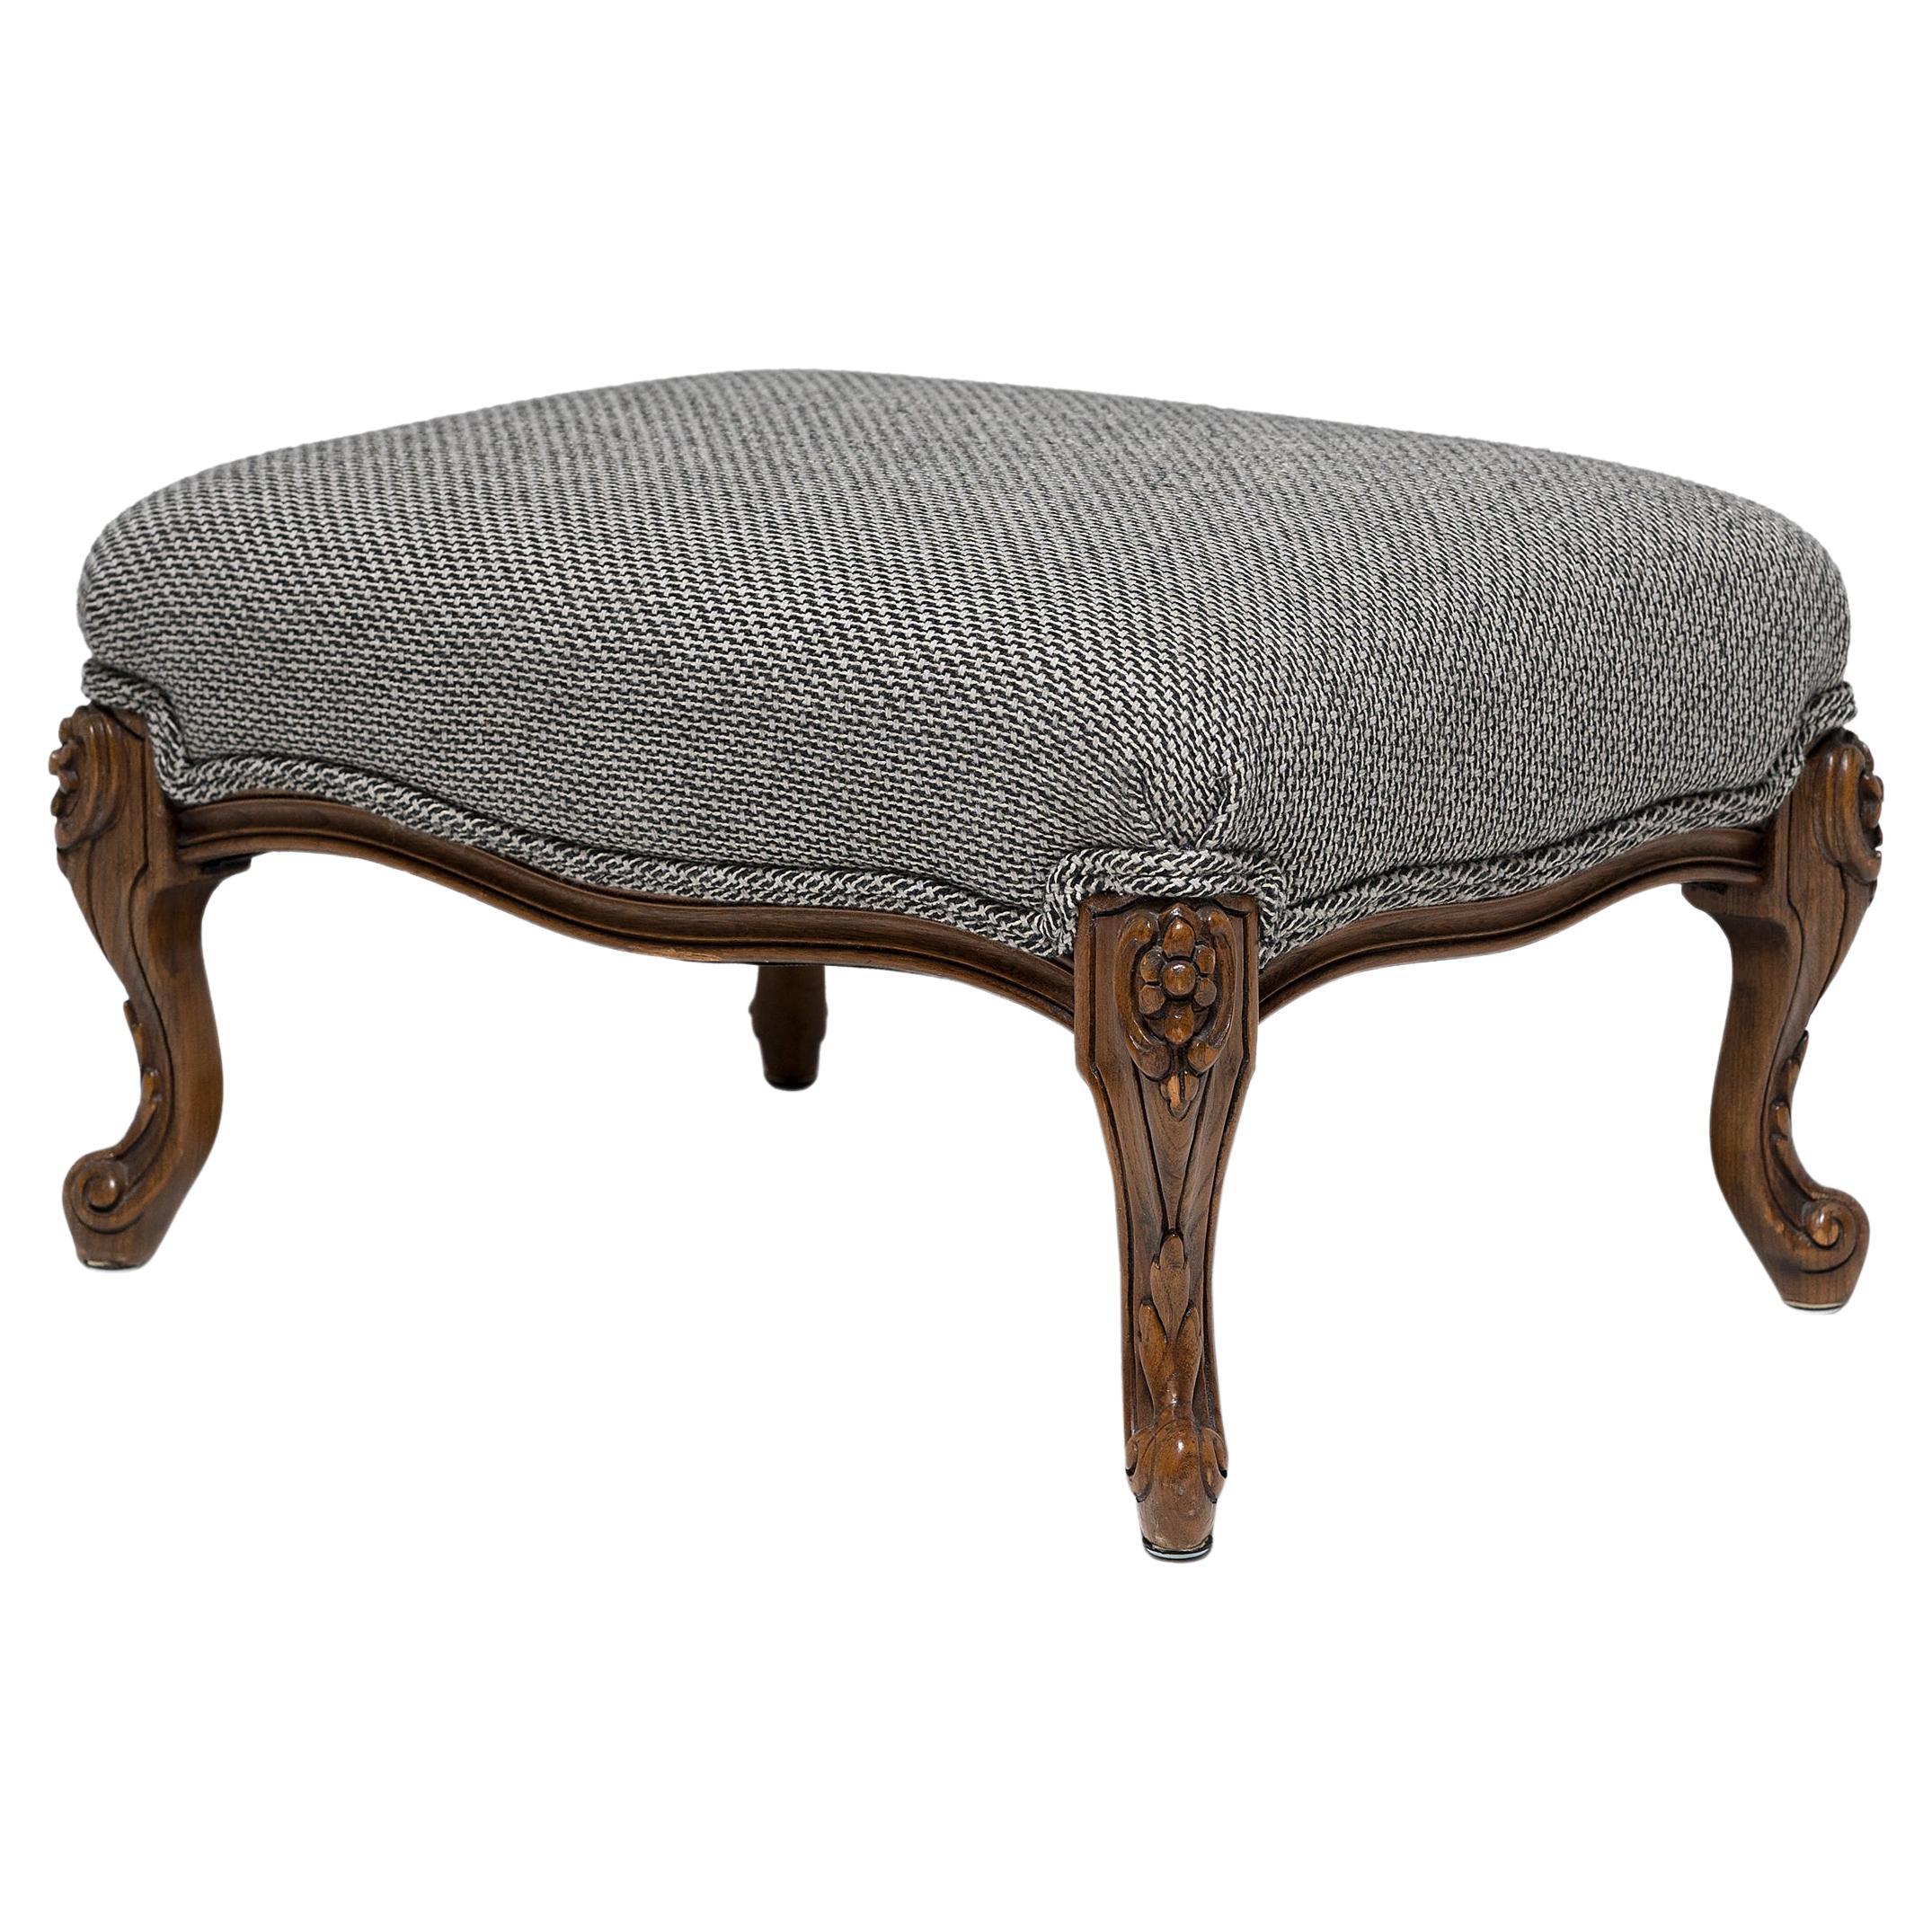 French Louis XV Style Upholstered Footstool, c. 1850